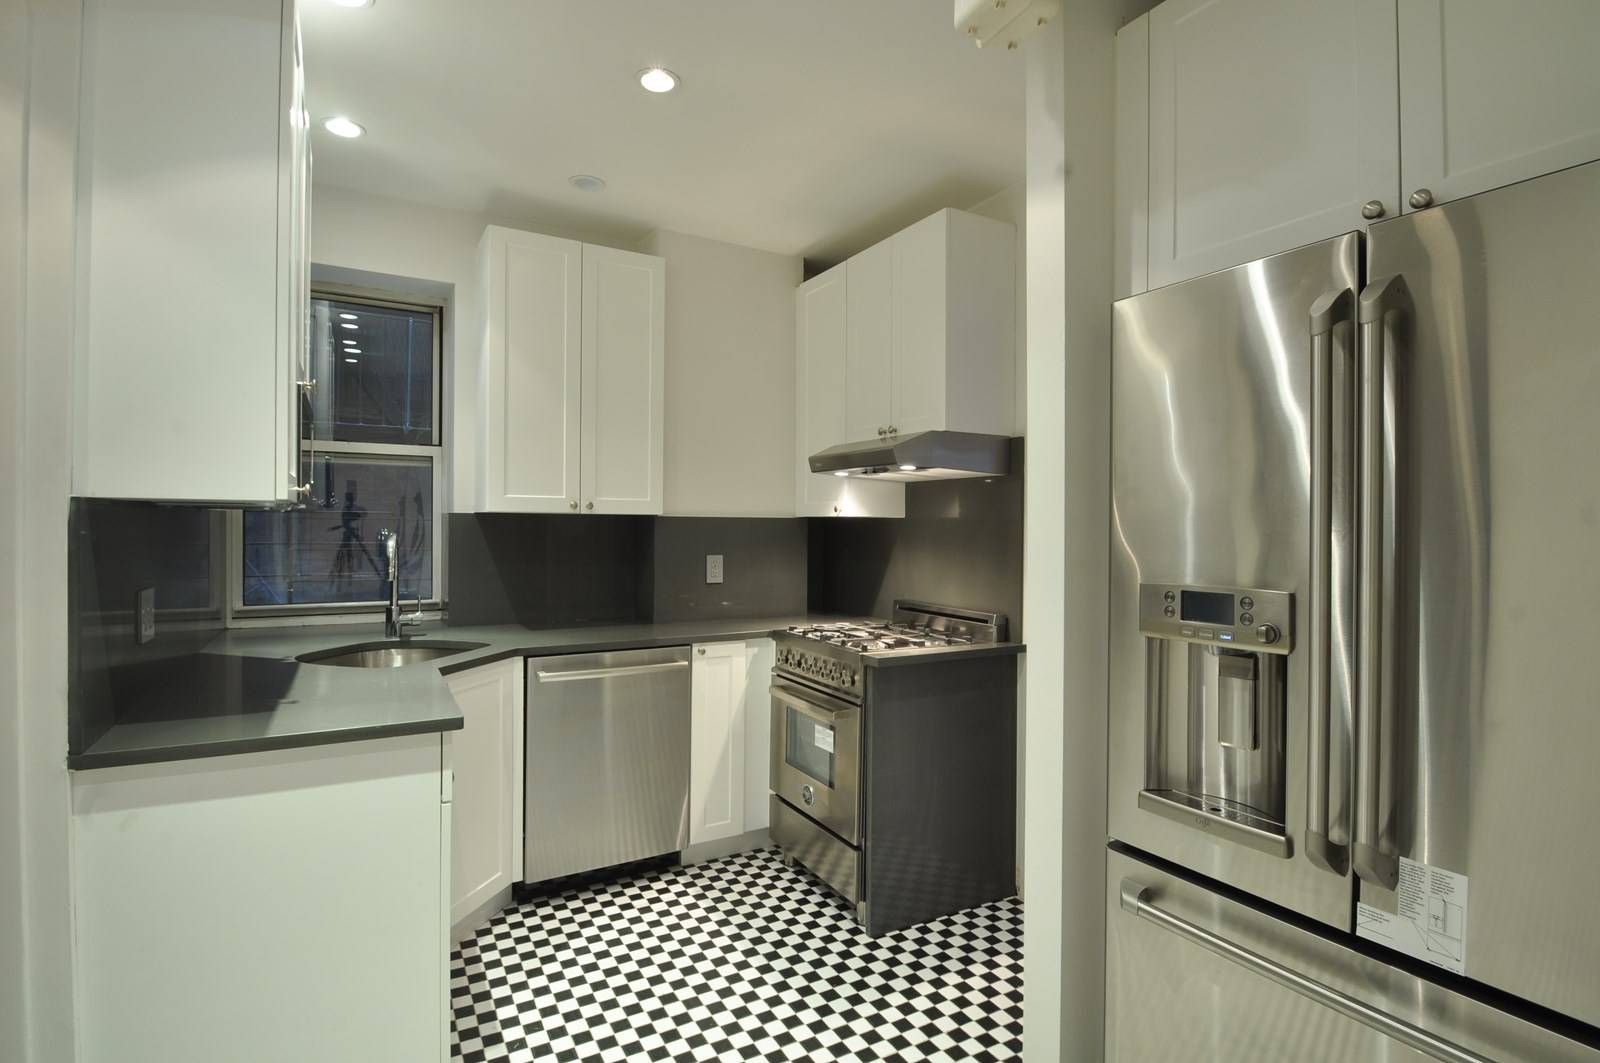 3 BEDROOM APARTMENT..UPPER EAST SIDE...LOCATED NEAR 4, 5, AND 6 TRAINS